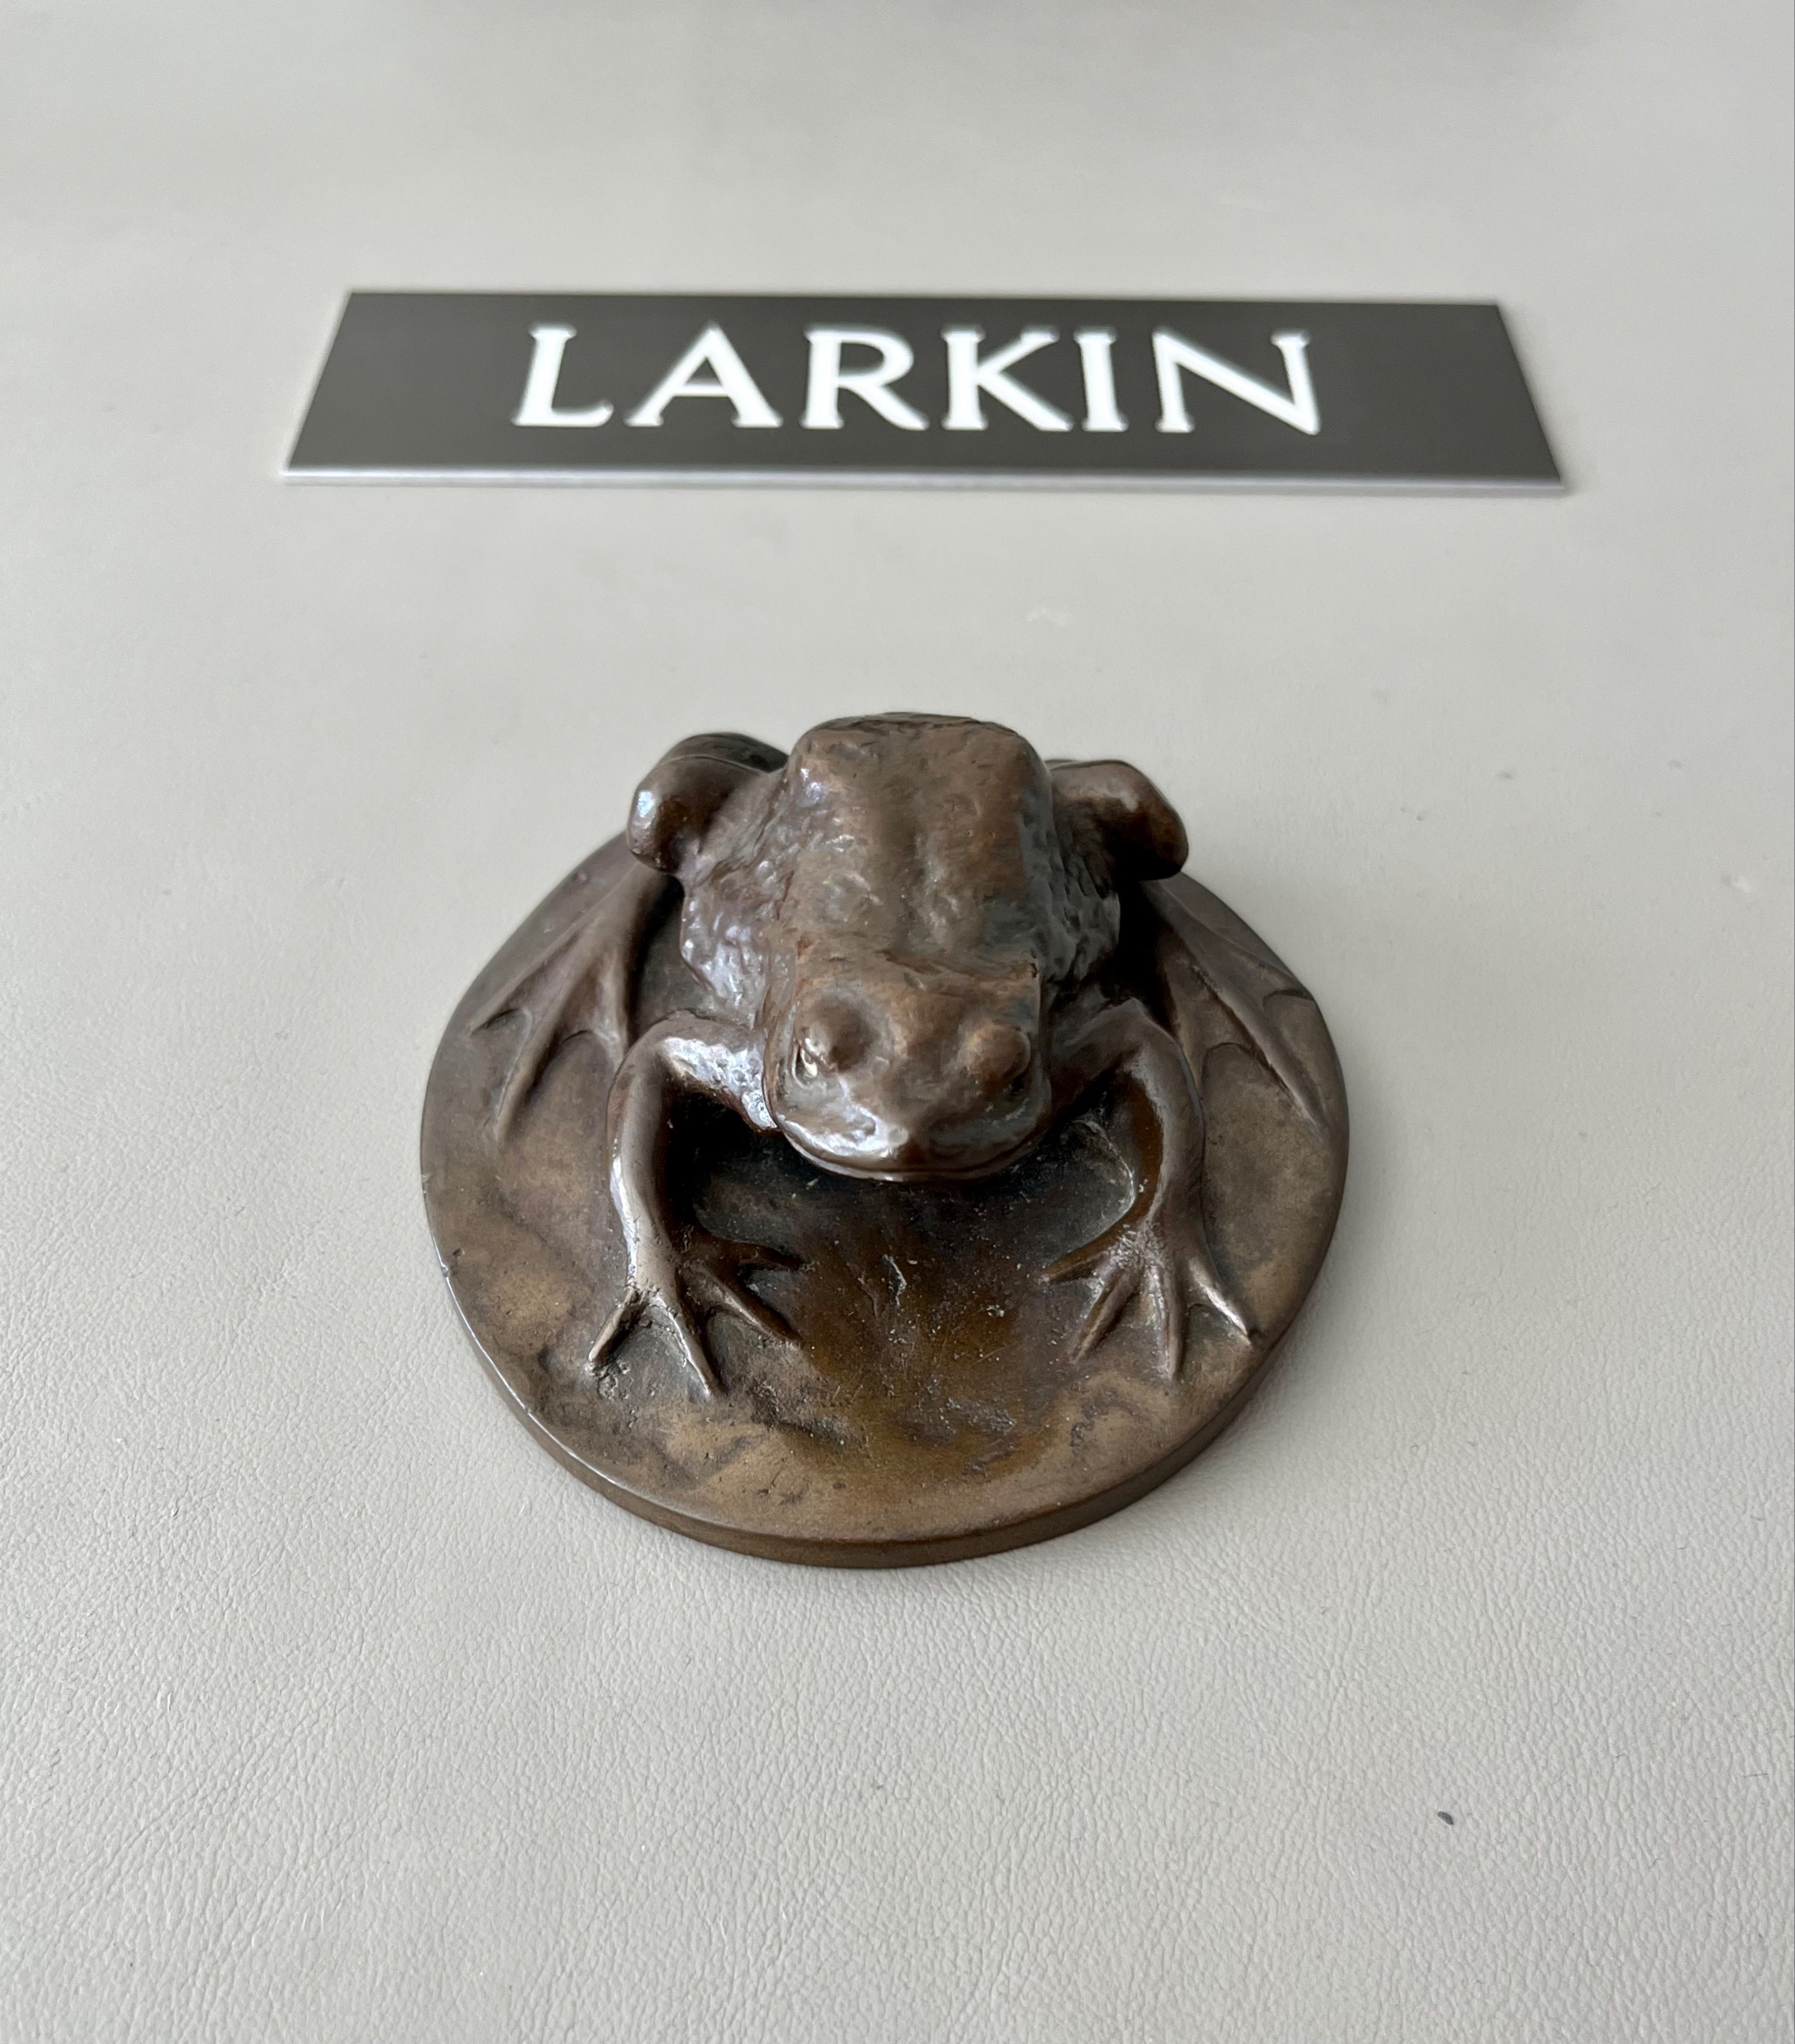 Larkin's toad ornament can be observed in front of Larkin's nameplate.